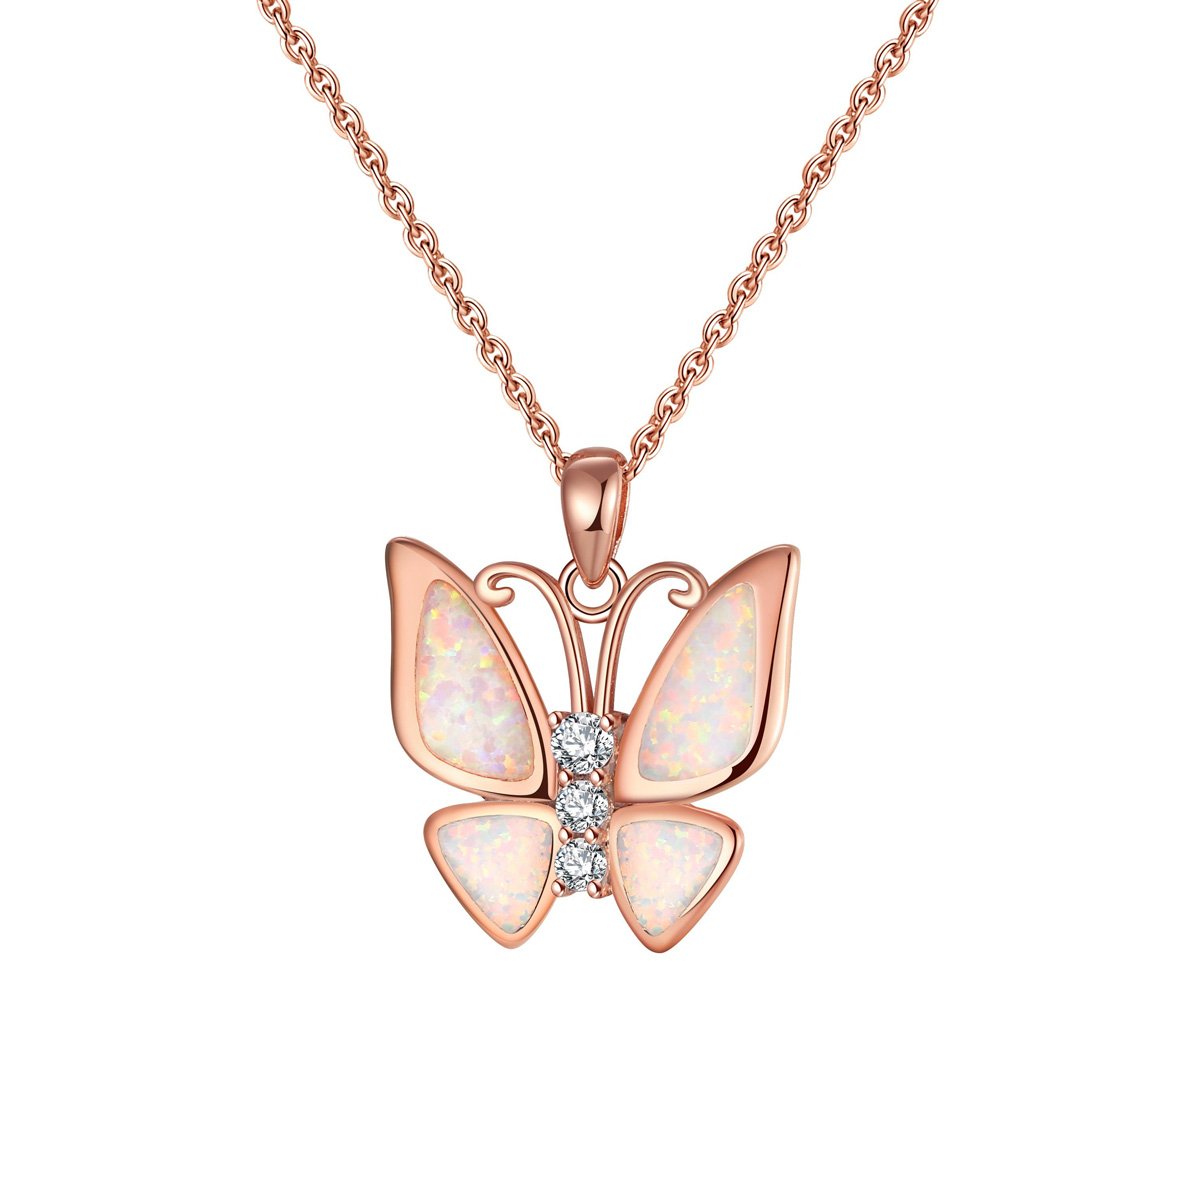 3 Sets of Be Like The Butterfly Fire Opal Butterfly Necklace Gift Set